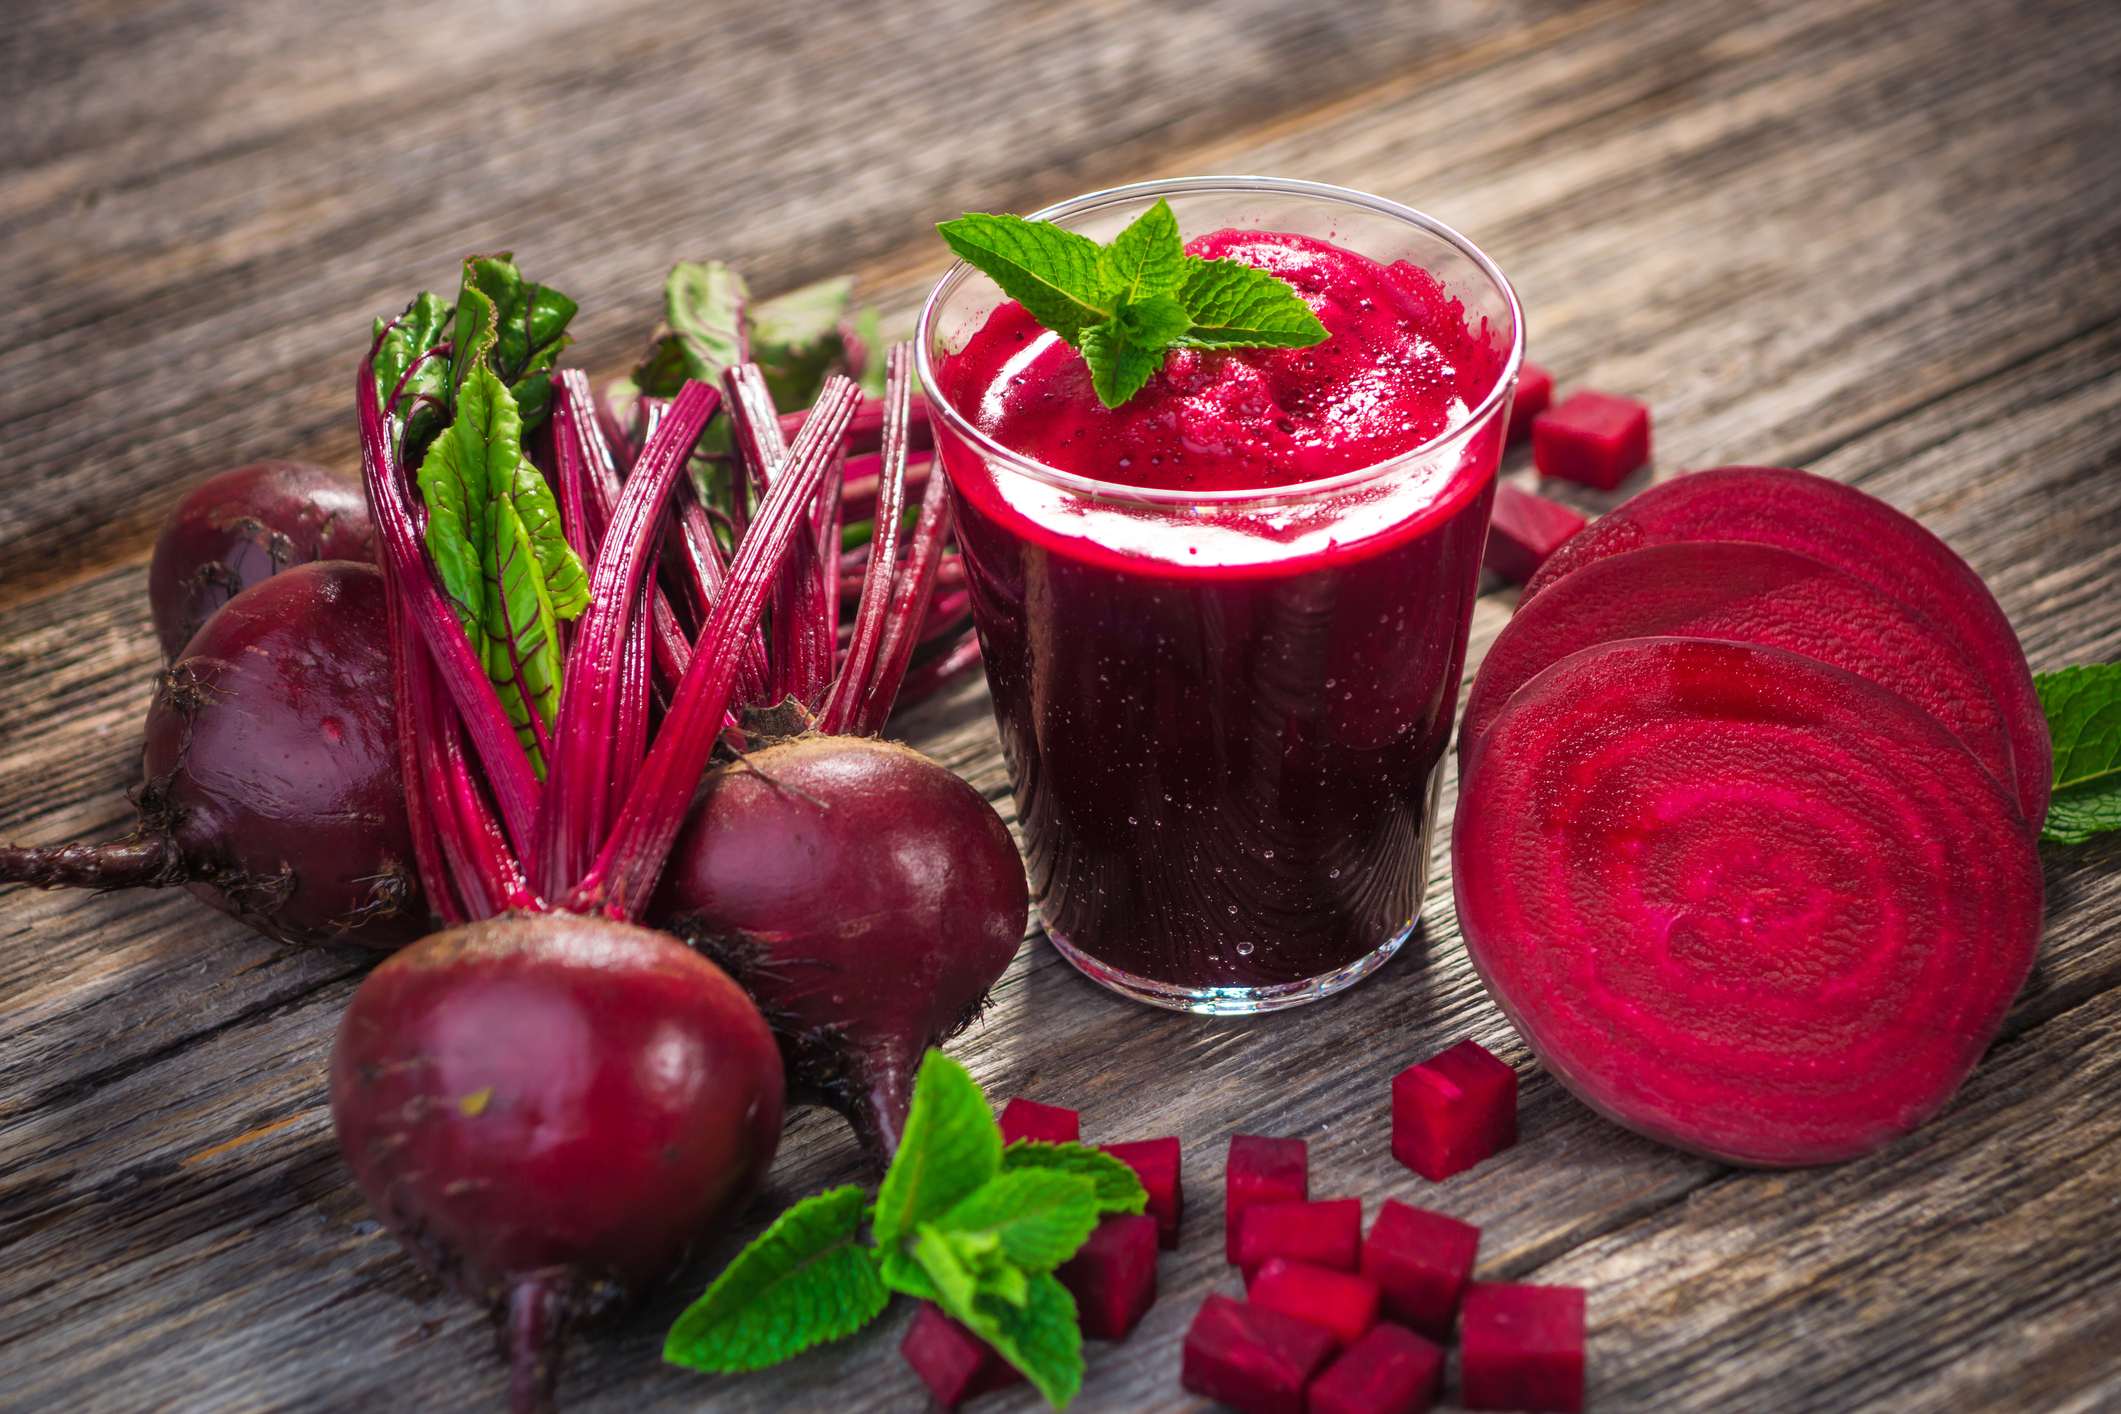 New study supports nitrate-rich beetroot juice's heart health benefits